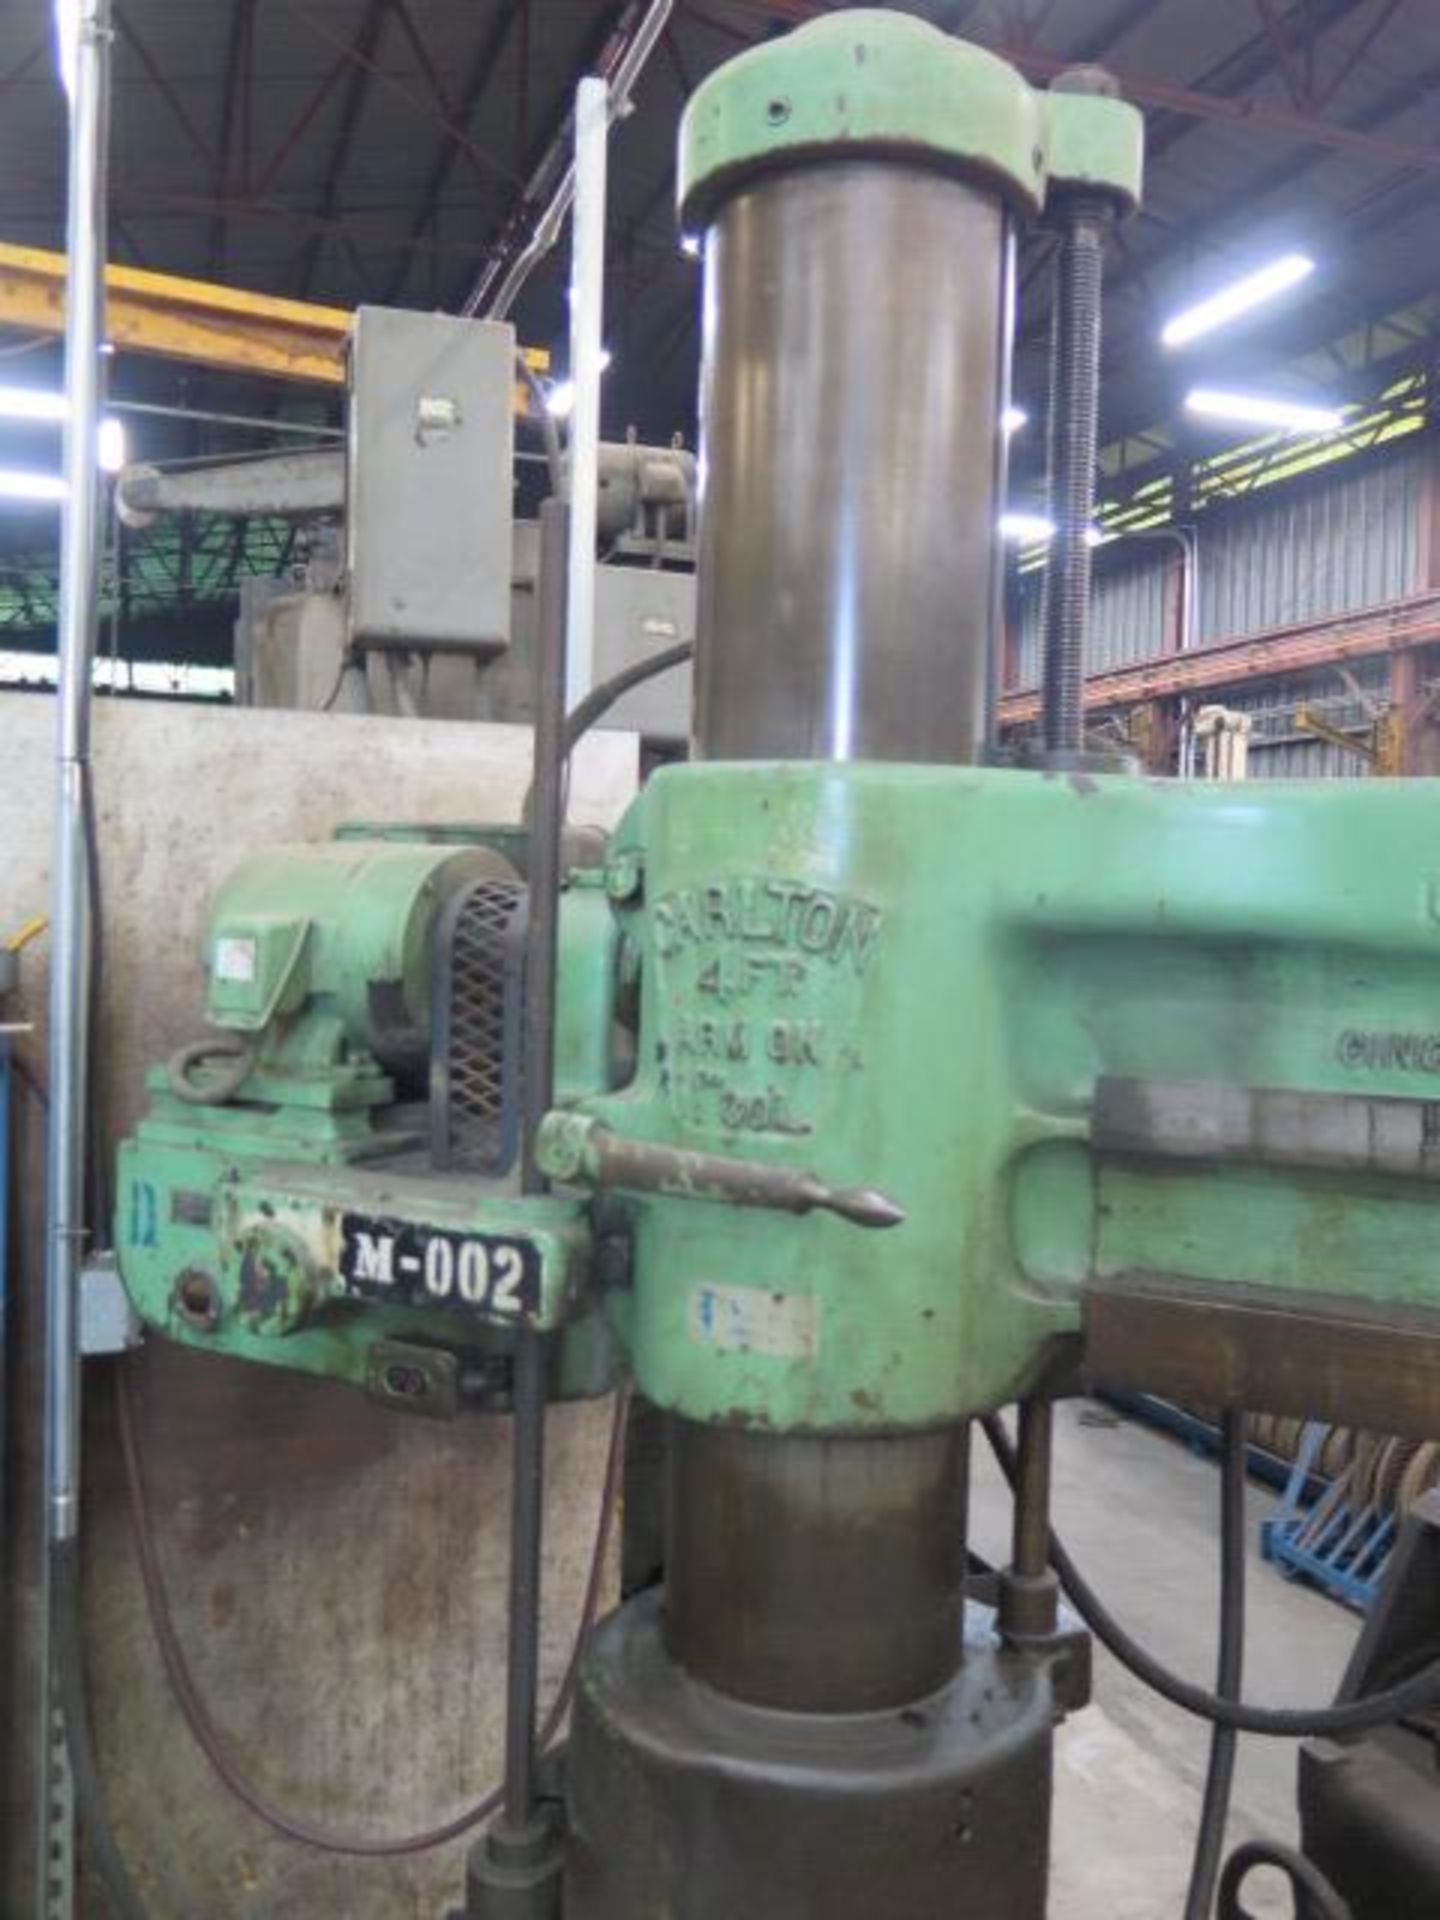 Carlton 11” Column x 48” Radial Arm Drill w/ 80-1500 RPM, Power Column and Feeds, SOLD AS IS - Image 4 of 10